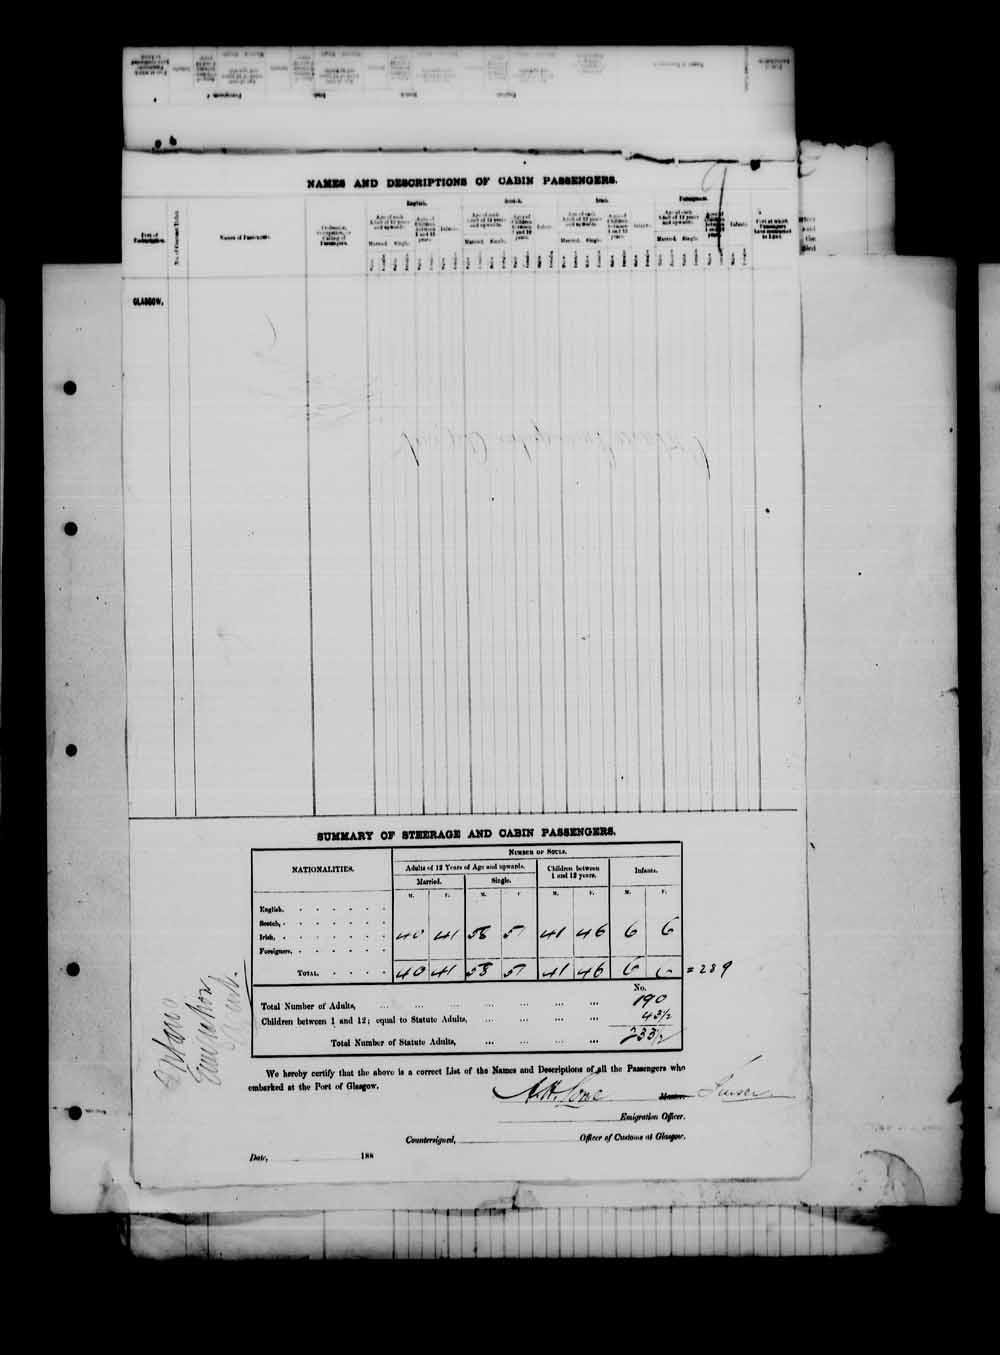 Digitized page of Passenger Lists for Image No.: e003542789